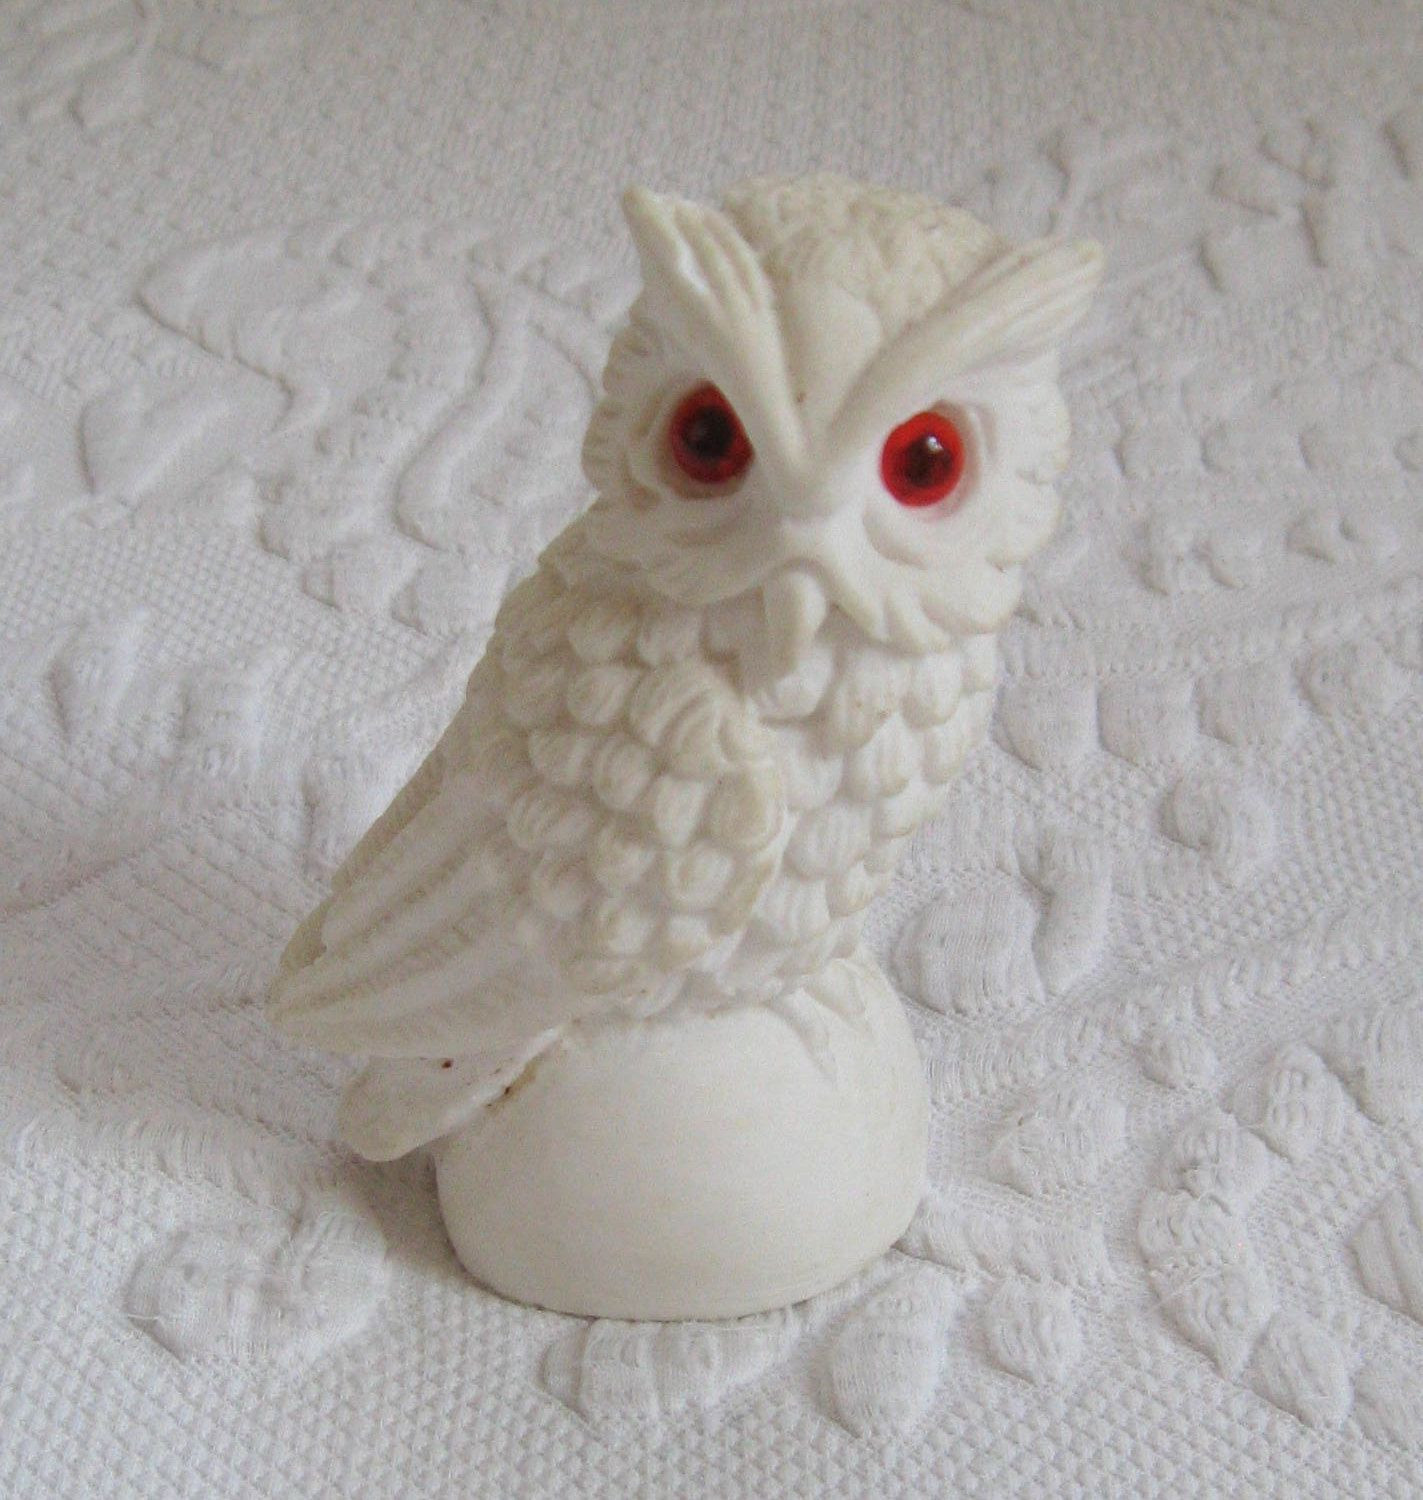 20 Perfect norleans Vase Made In Italy 2024 free download norleans vase made in italy of snow owl snow owl figurine norleans made in italy alabaster with vintage snow owl figurine by norleans made in italy alabaster owl by vintagous on etsy